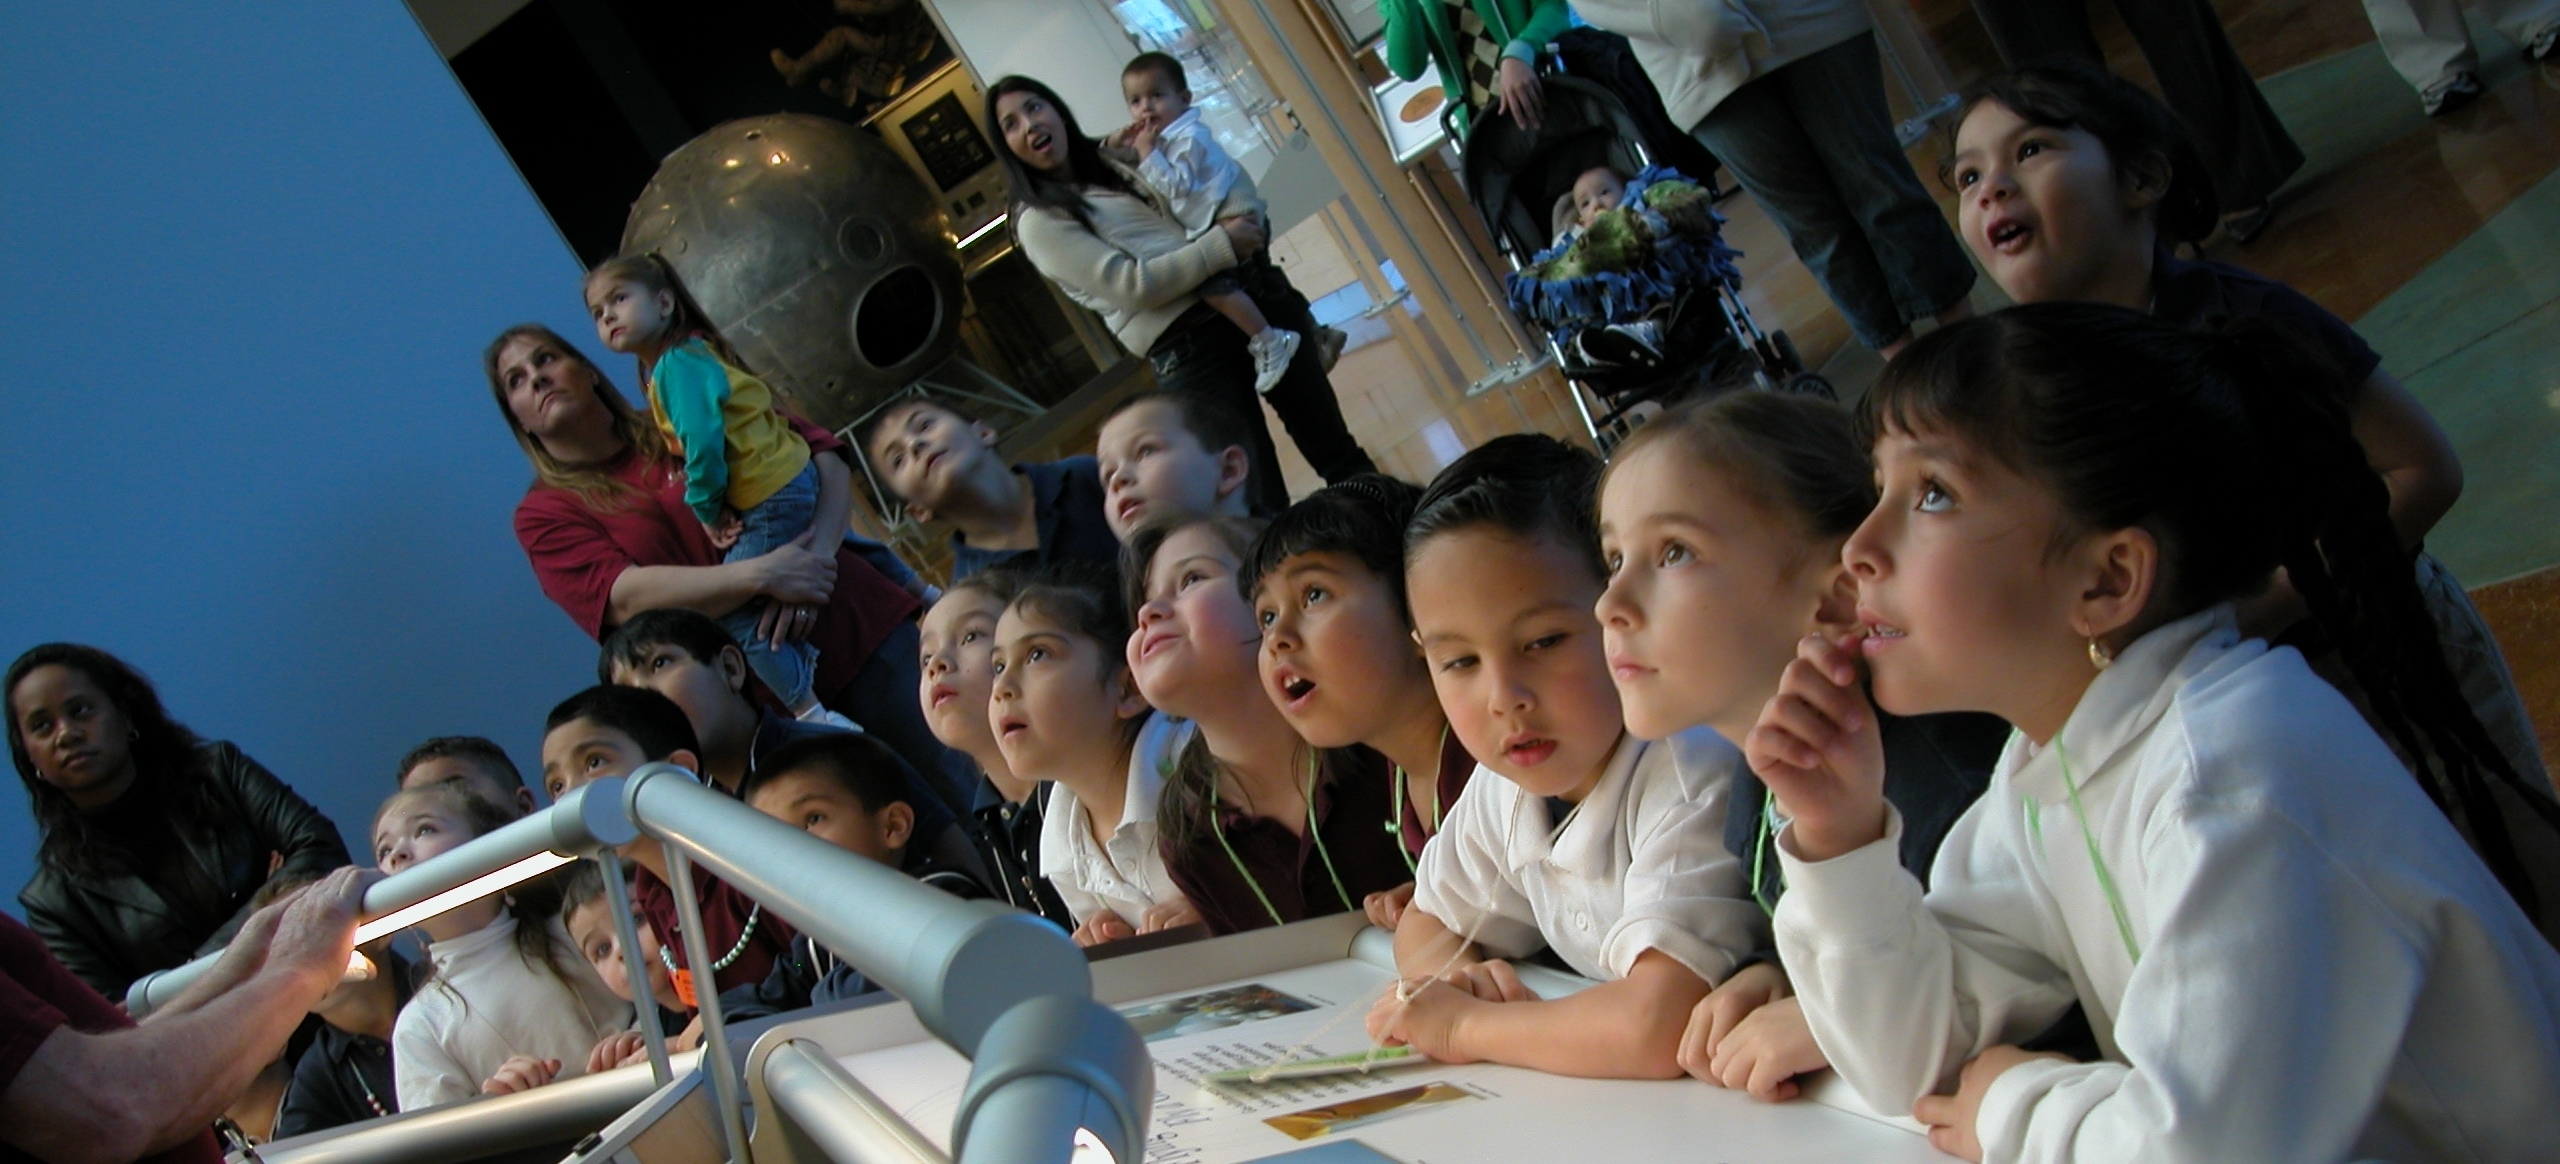 A photo of a group of students at the Balloon Museum.